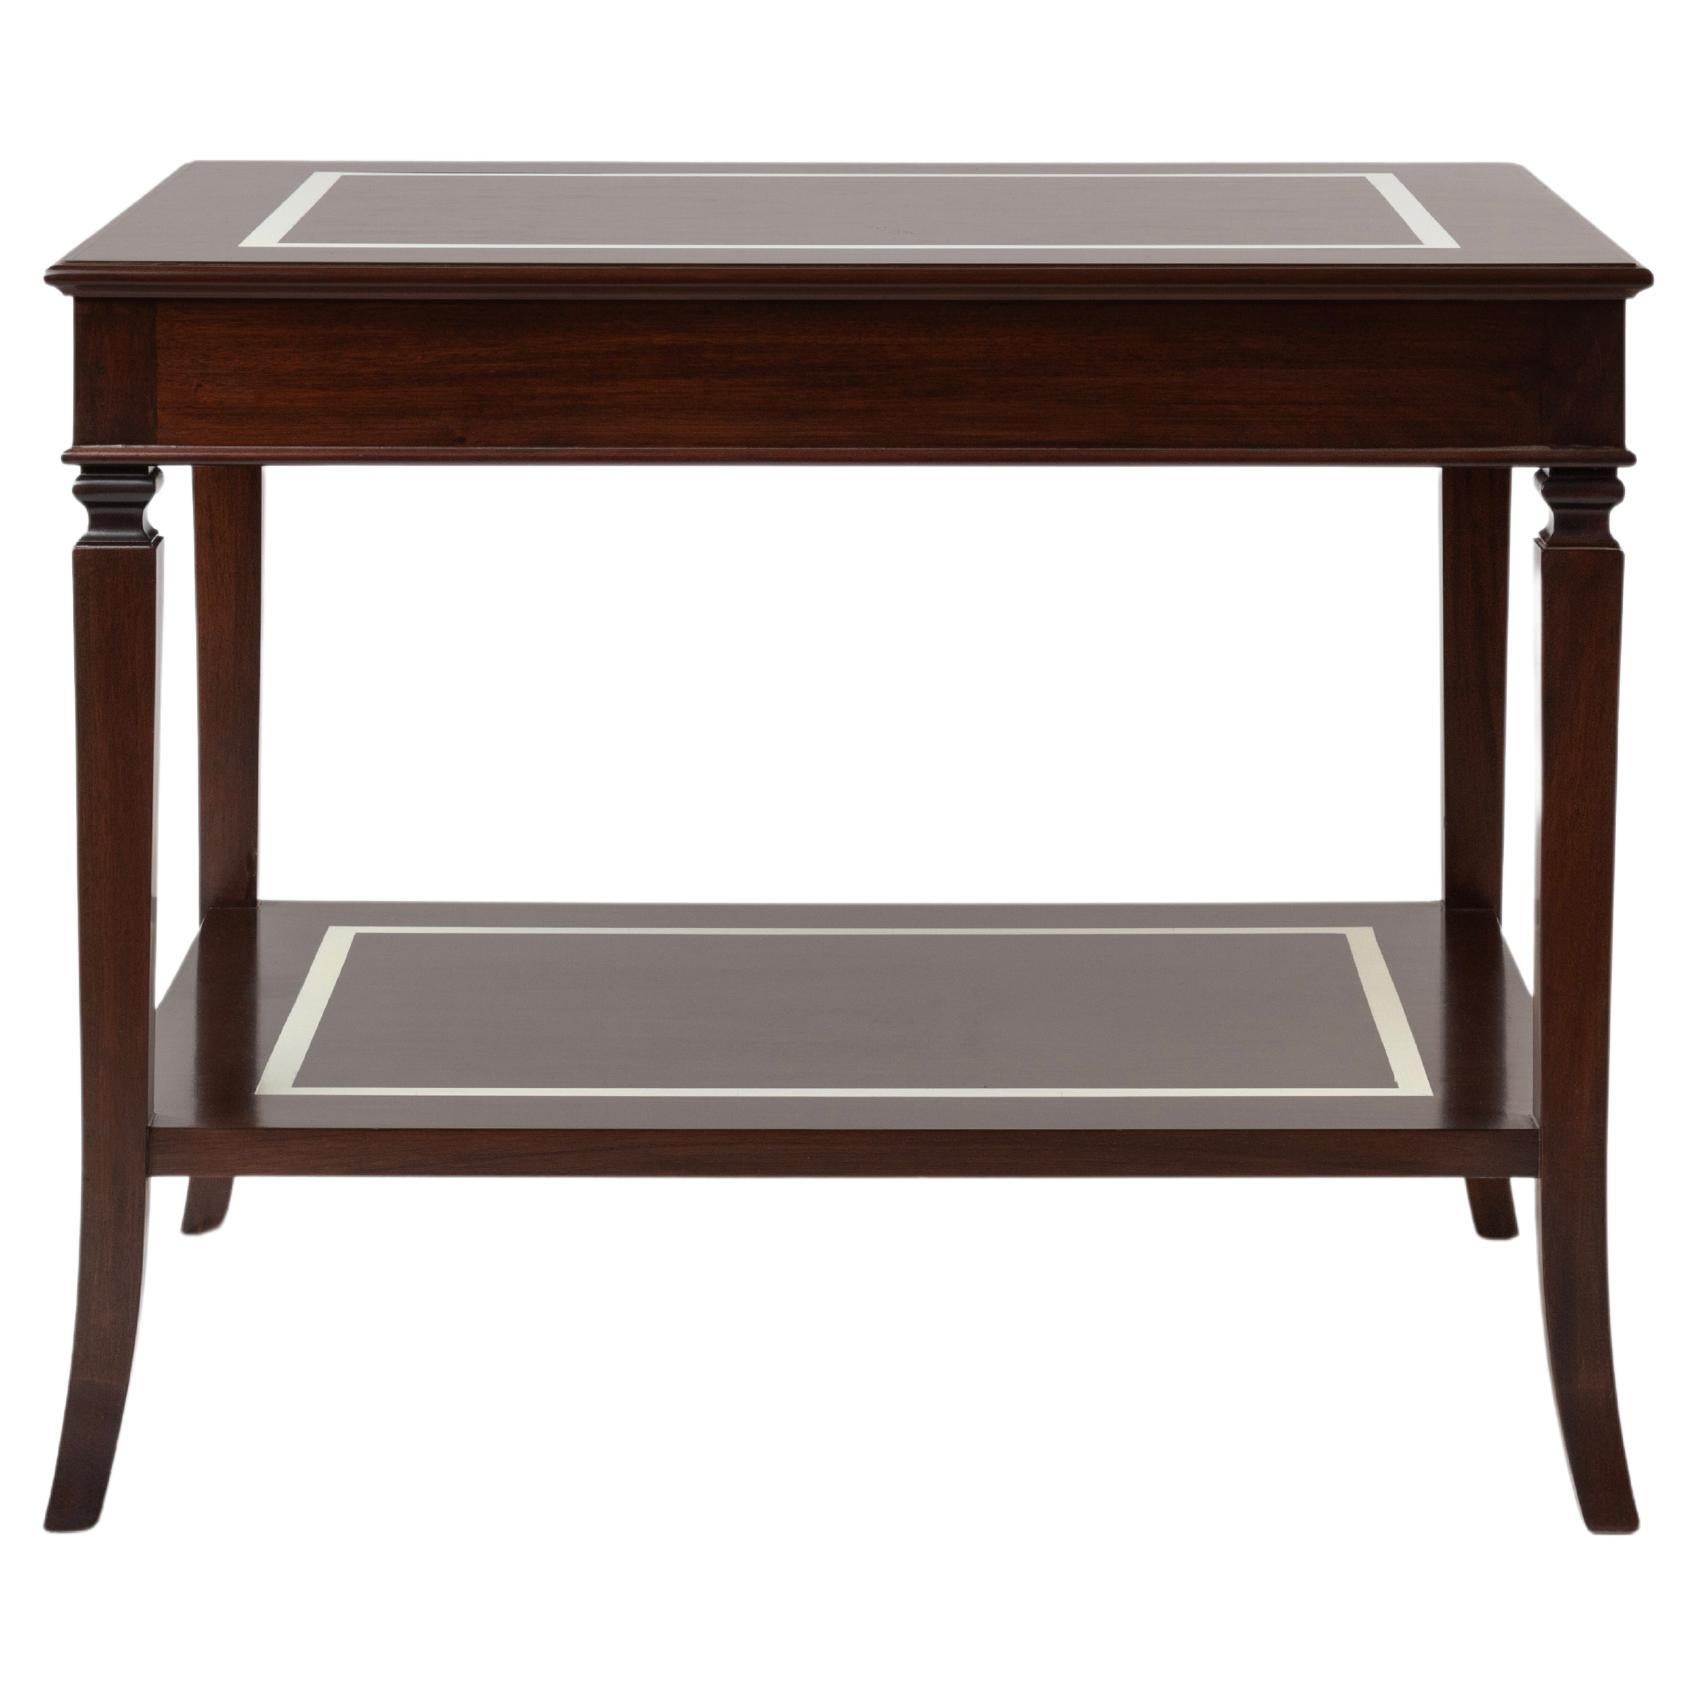 Two Story Mahogany Side Table